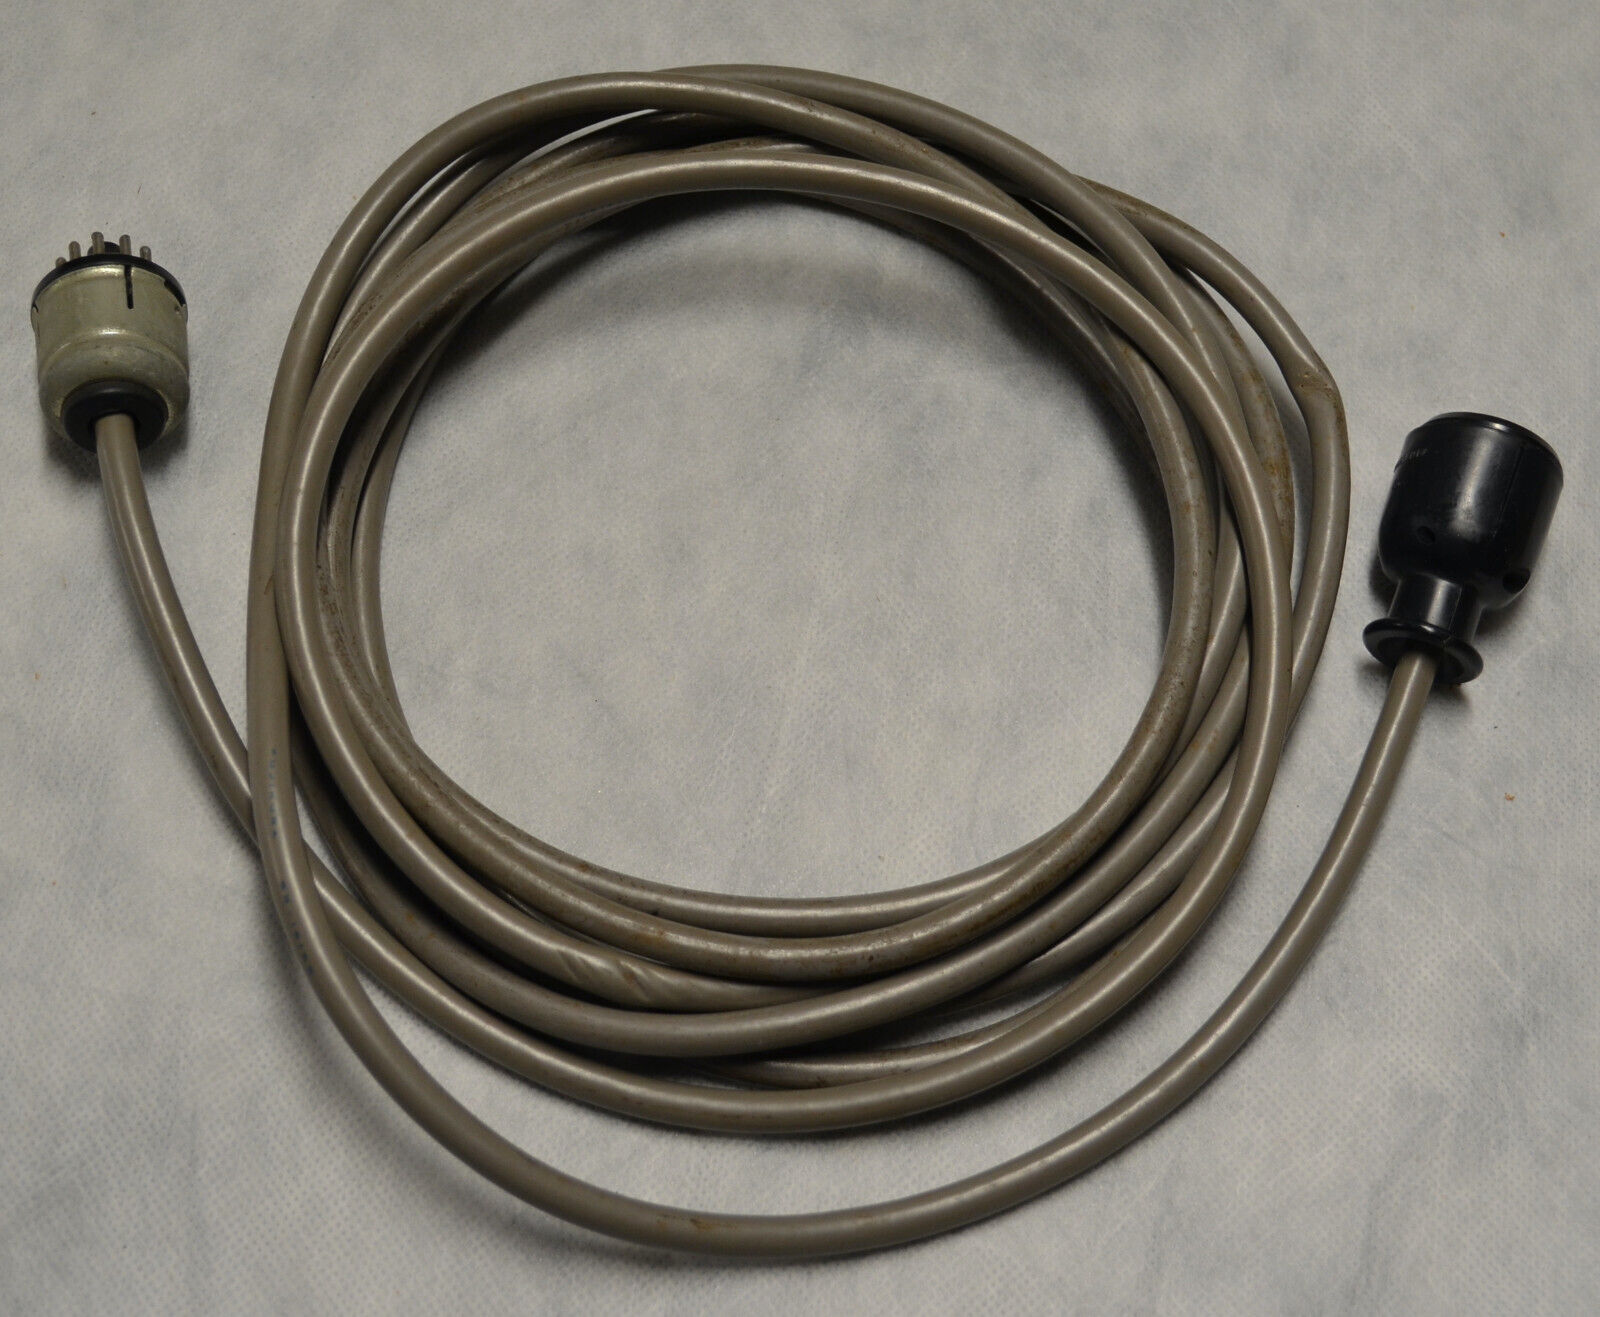 Vintage Sony 11-pin cable from the 1970s. Approximately 16-feet. Audio/Video Use